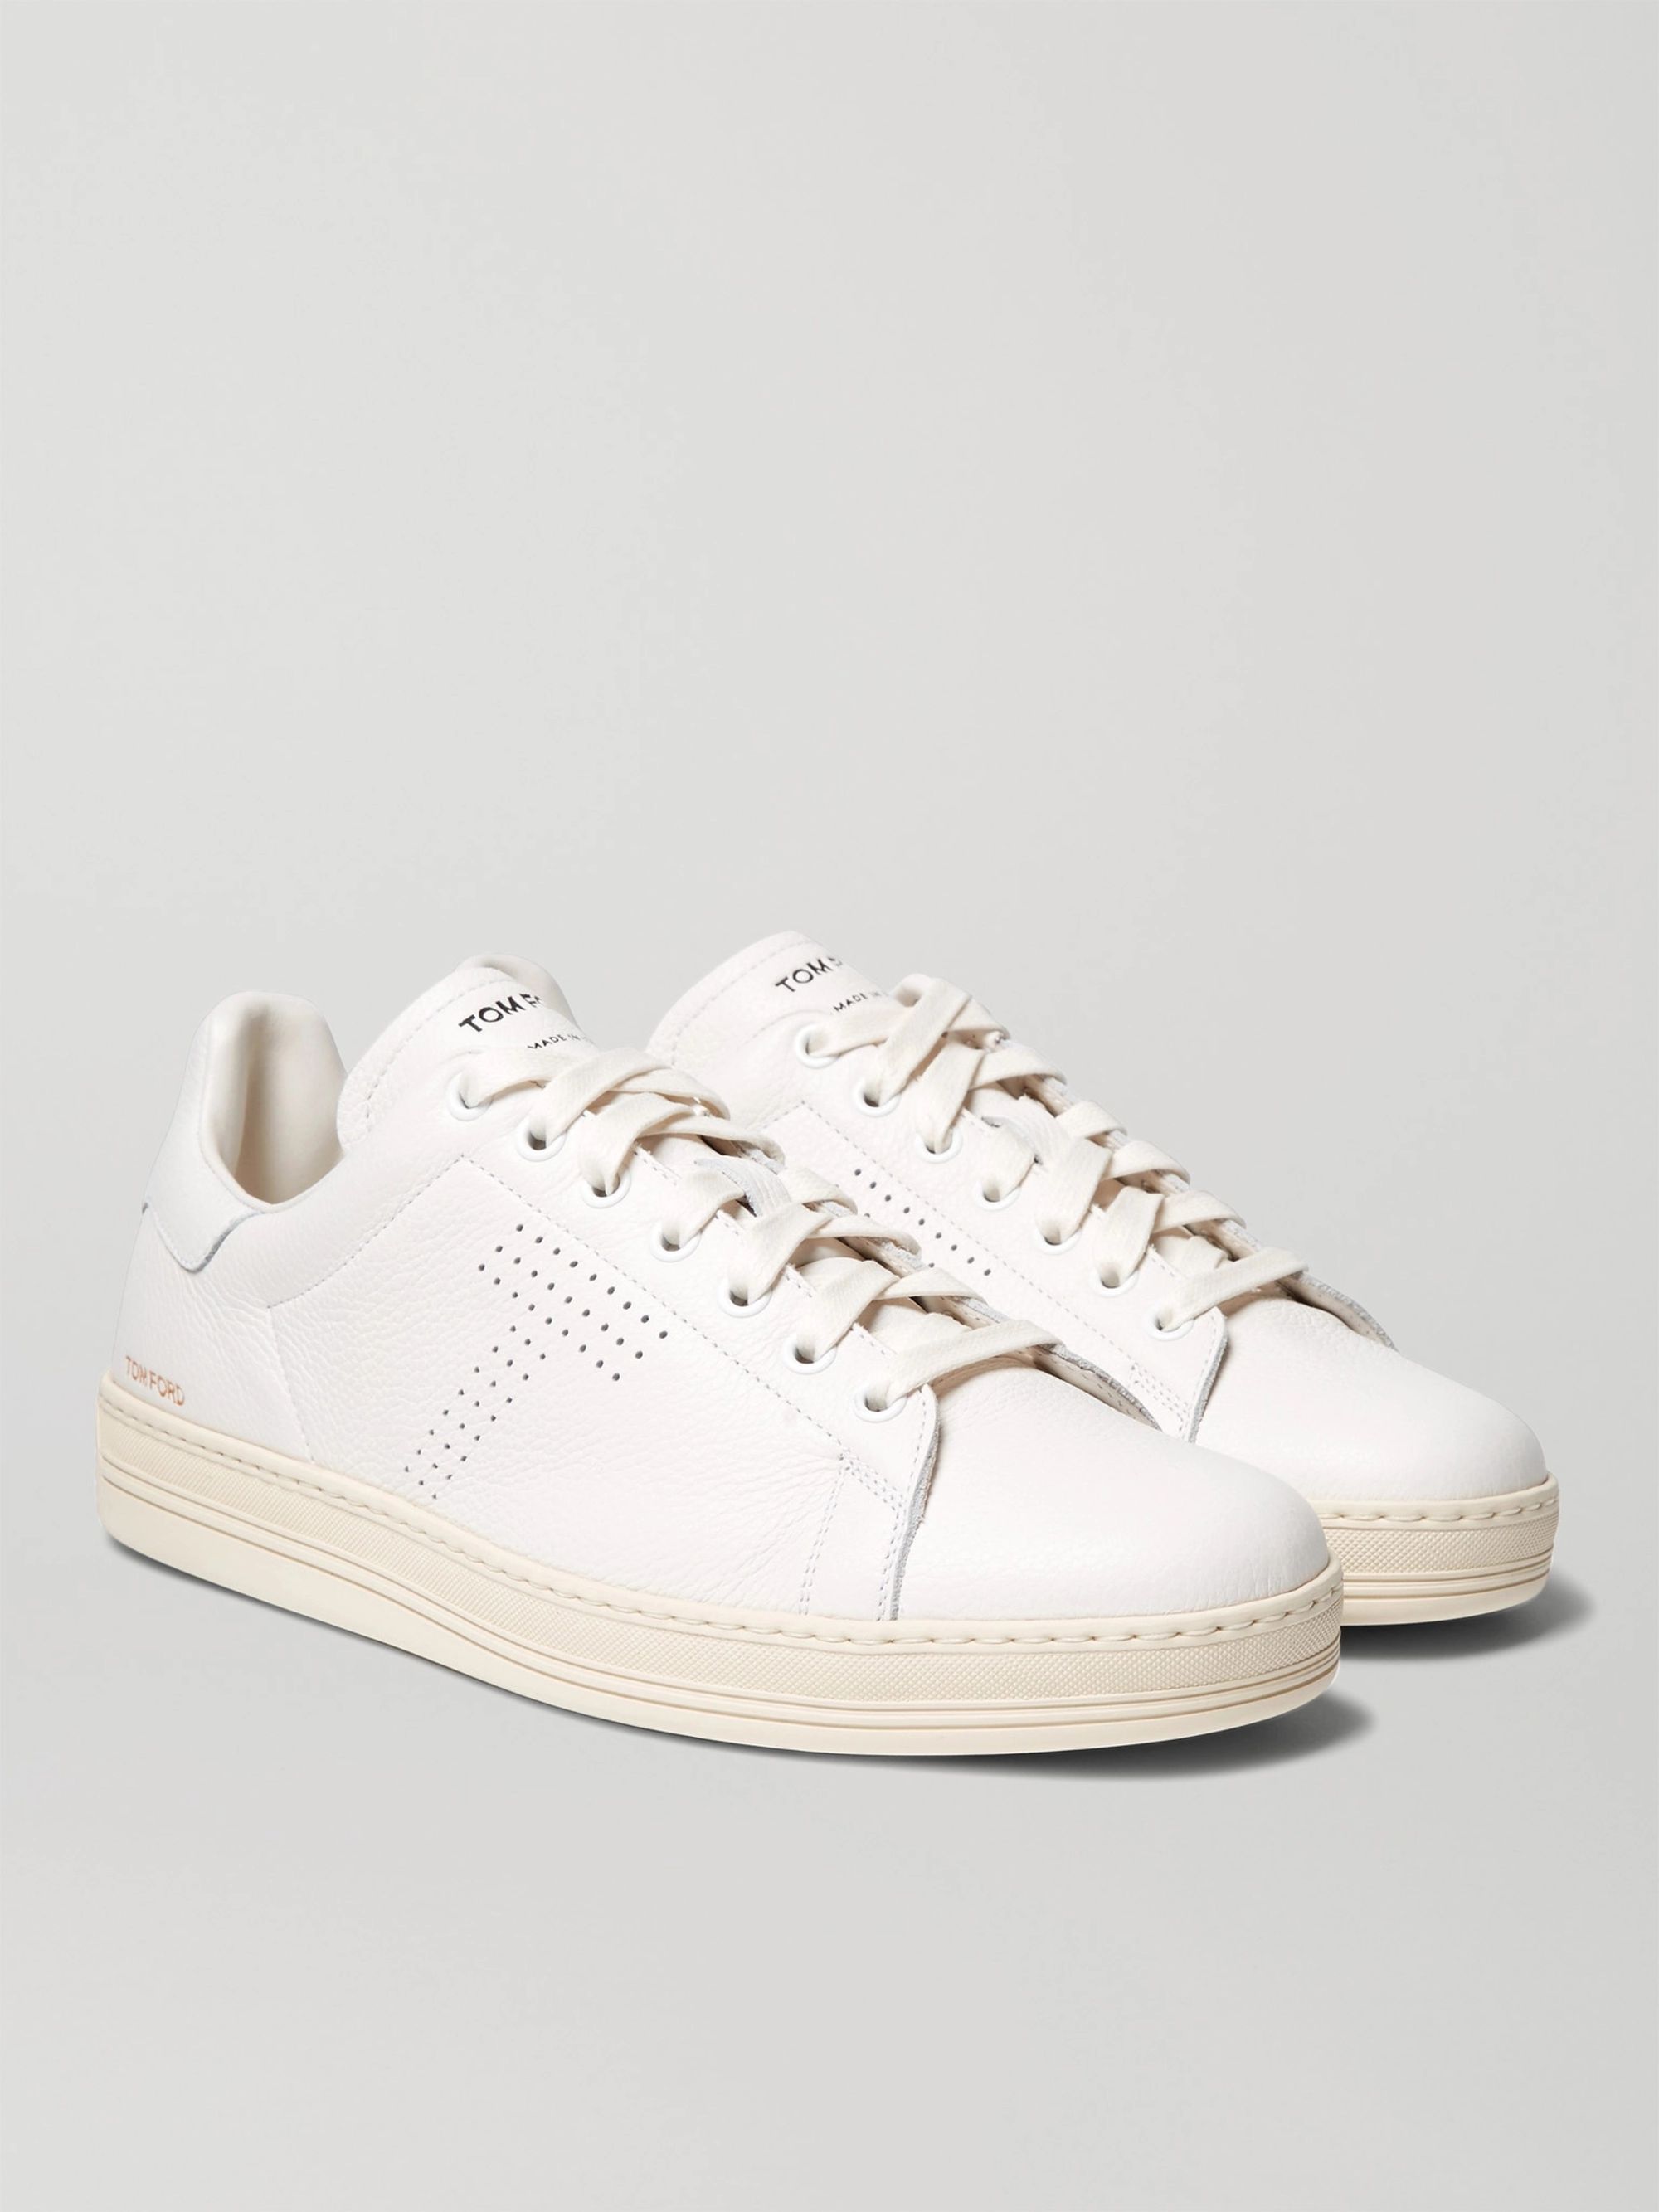 tom ford leather sneakers